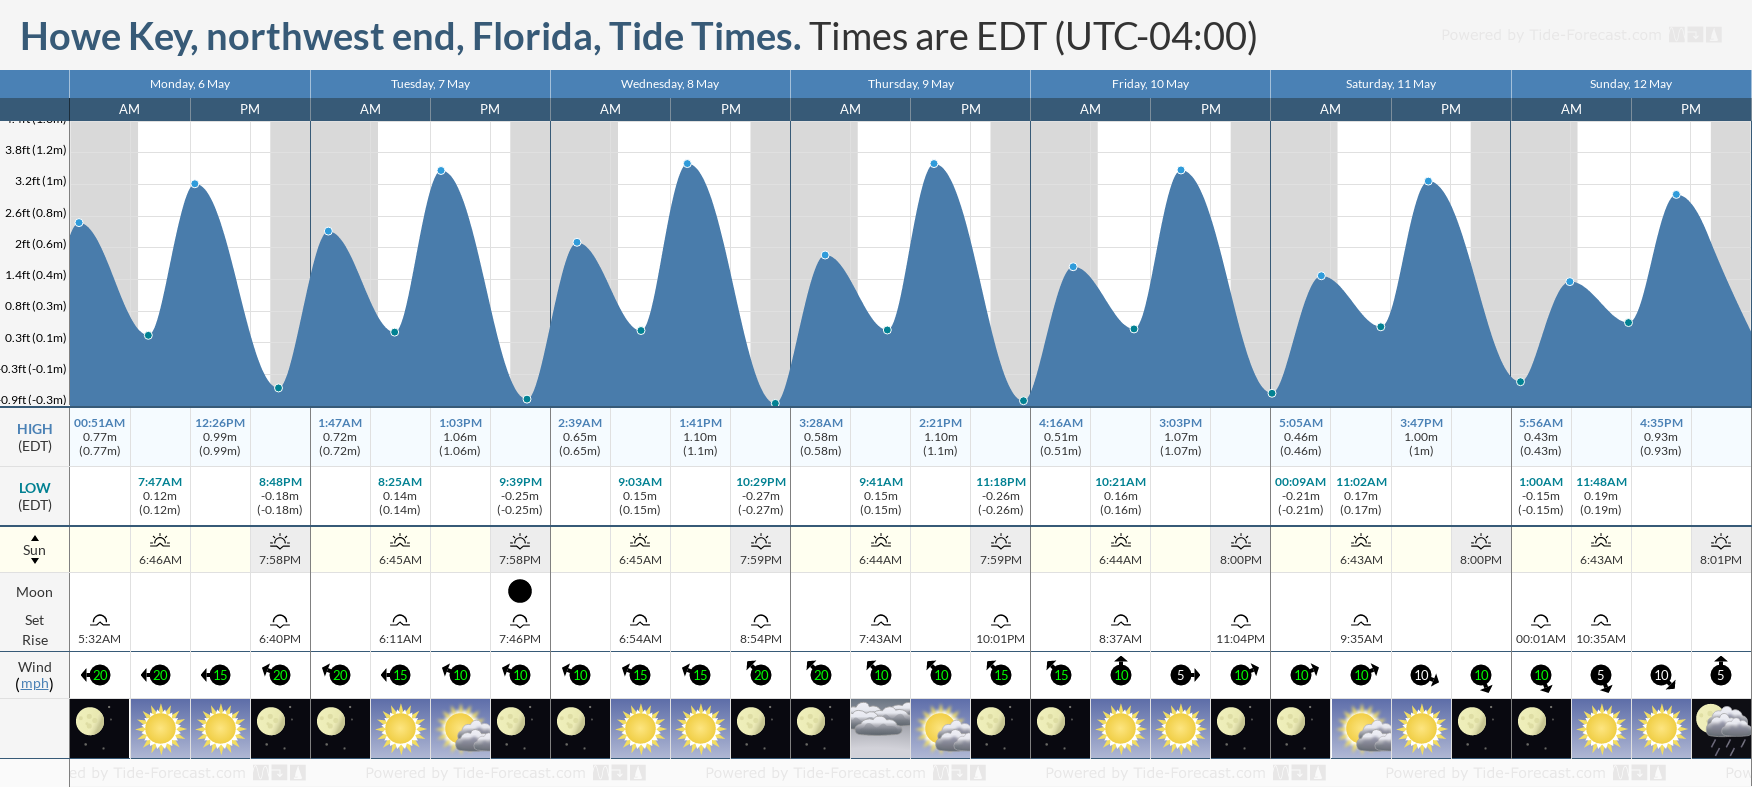 Howe Key, northwest end, Florida Tide Chart including high and low tide times for the next 7 days